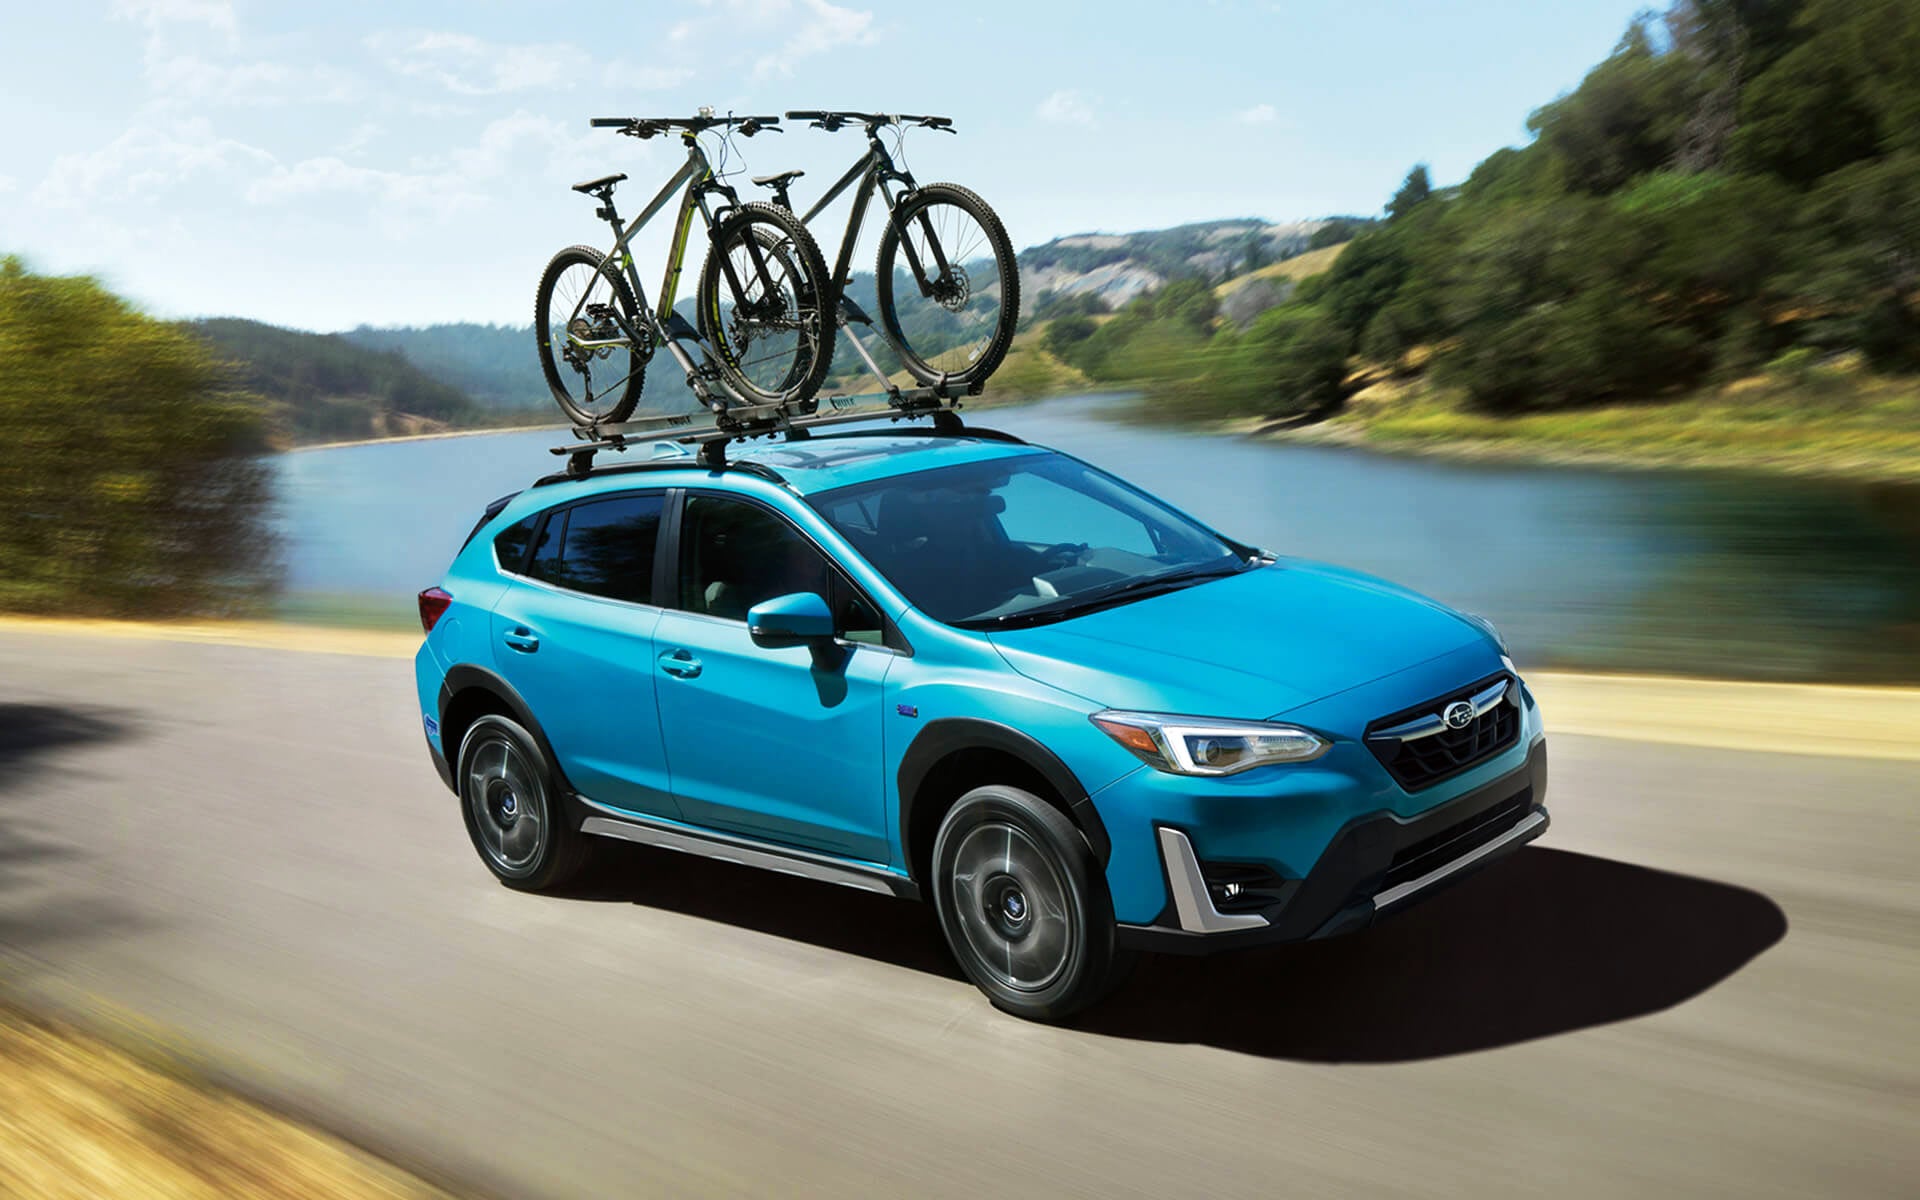 A blue Crosstrek Hybrid with two bicycles on its roof rack driving beside a river | Sommer's Subaru in Mequon WI